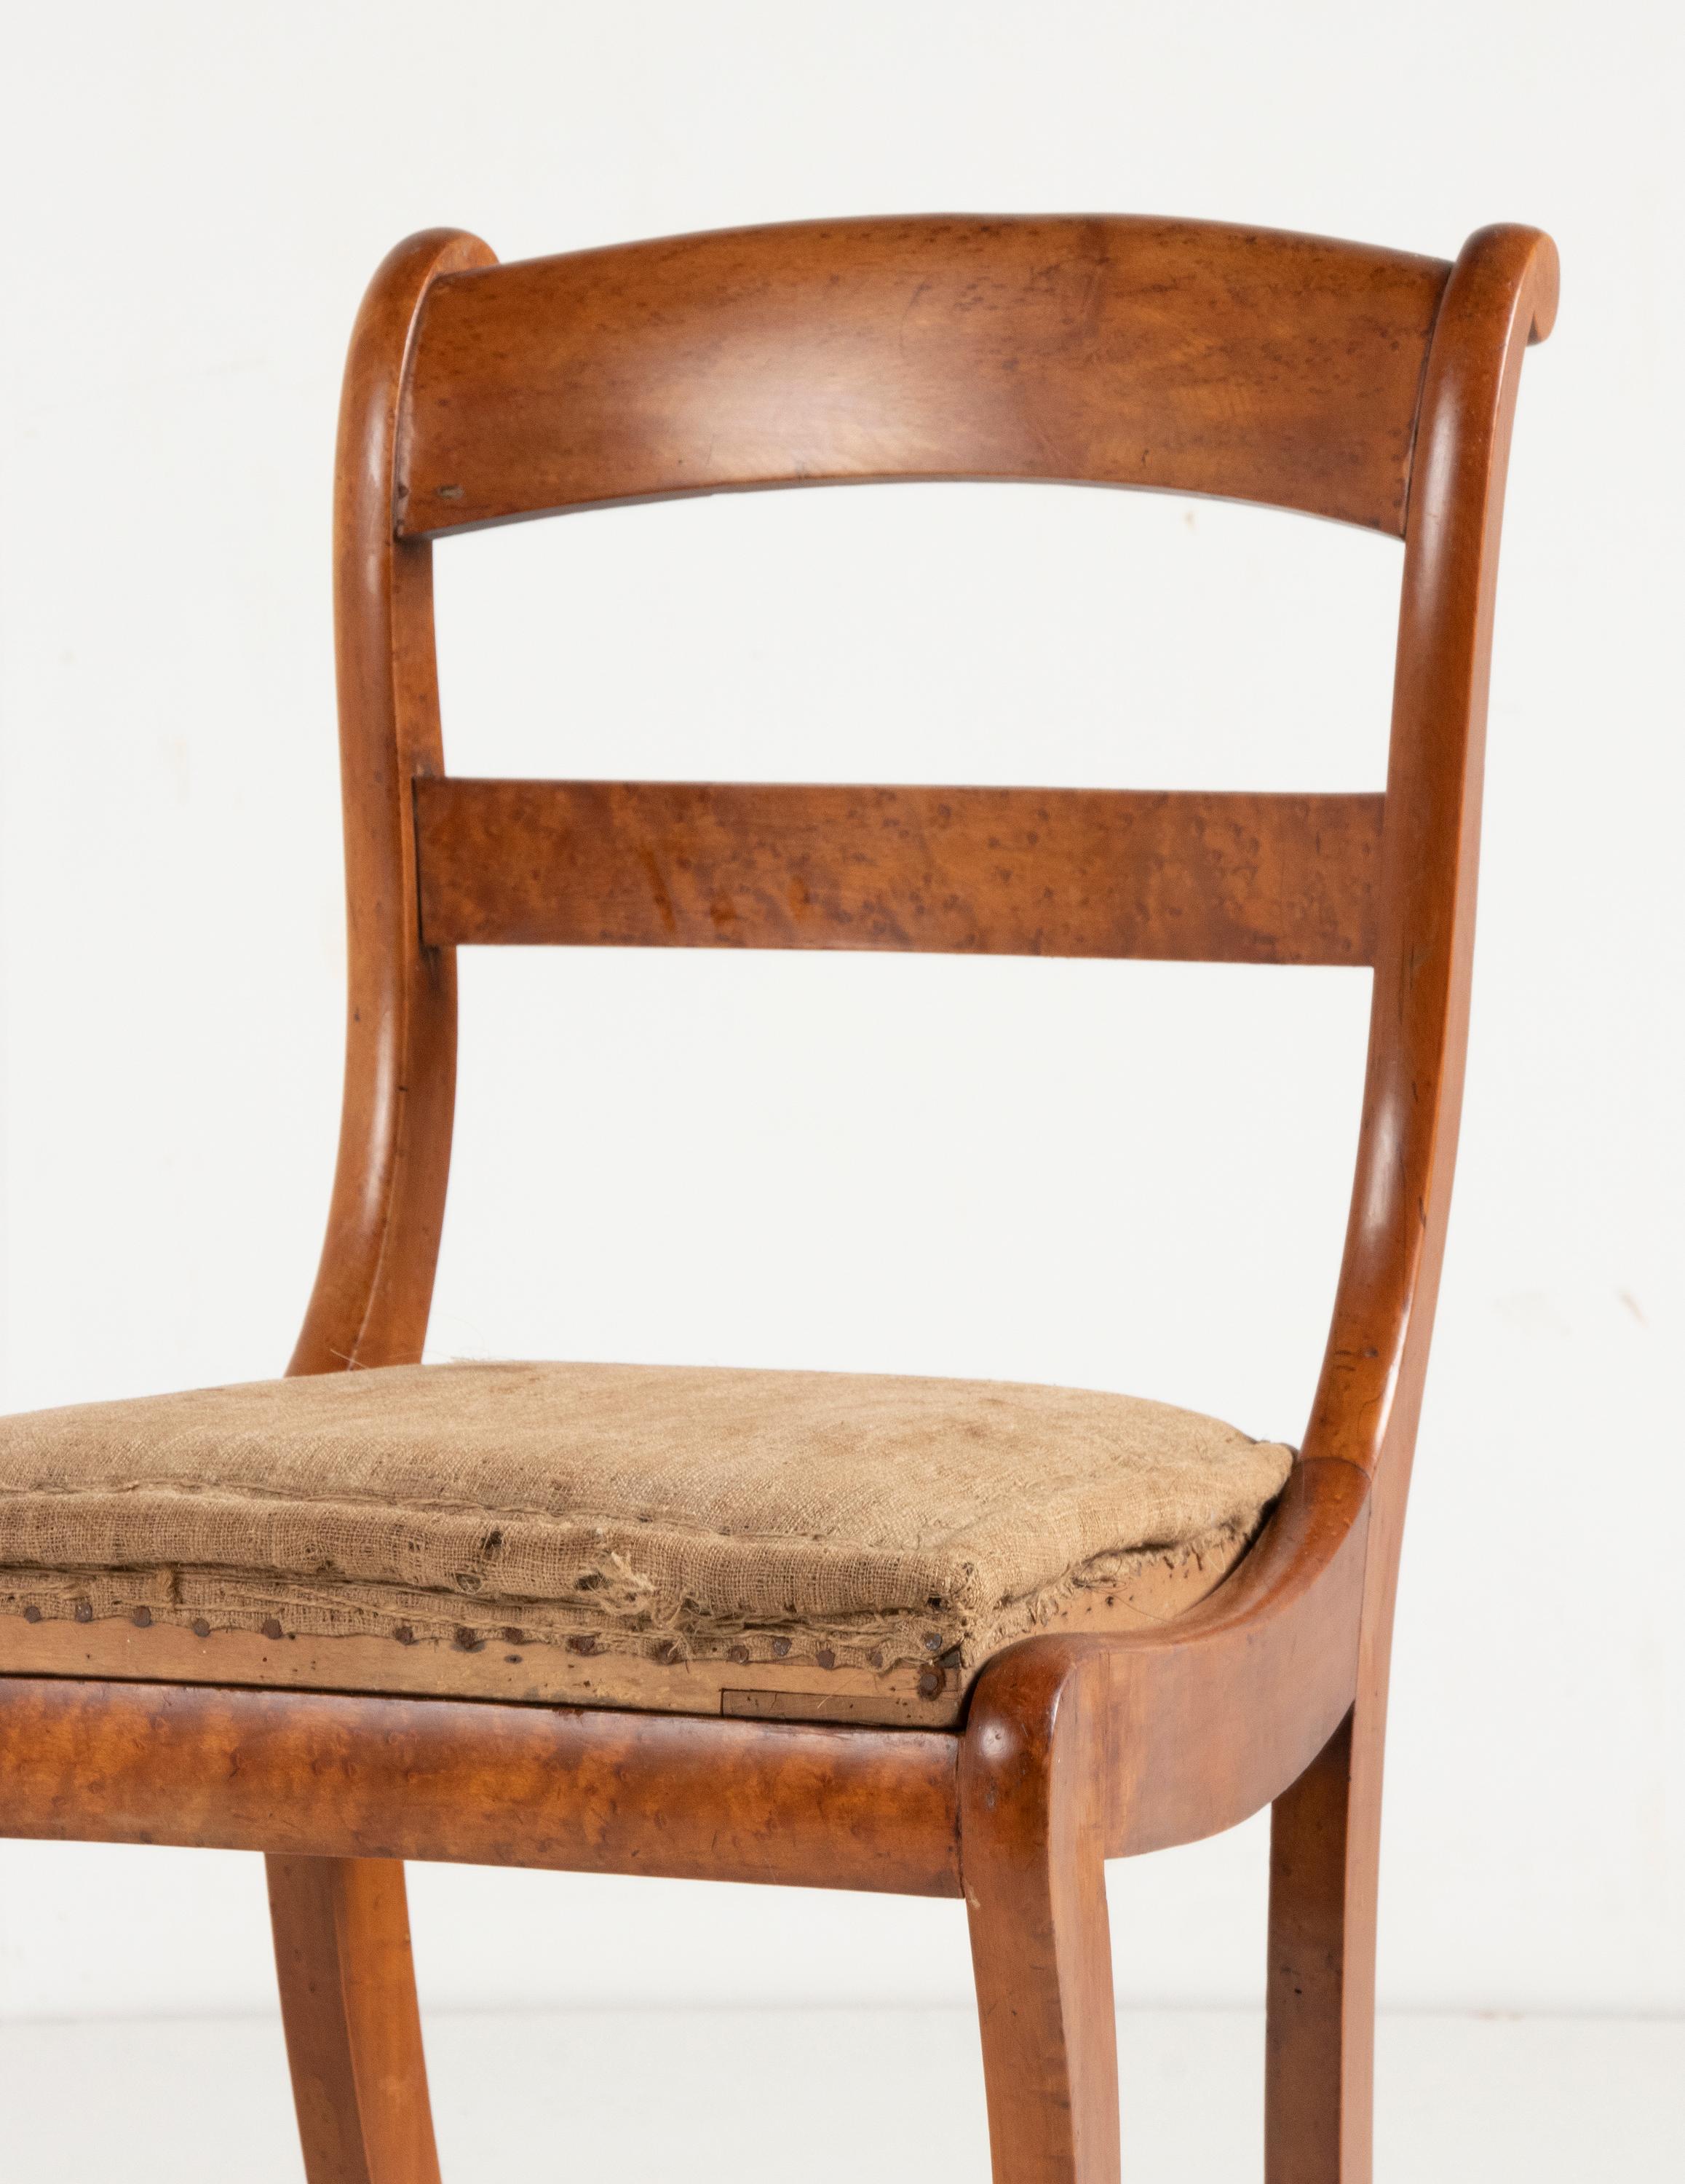 Early 19th Century Charles X Birds-Eye Maple Wood Dining Chairs For Sale 4